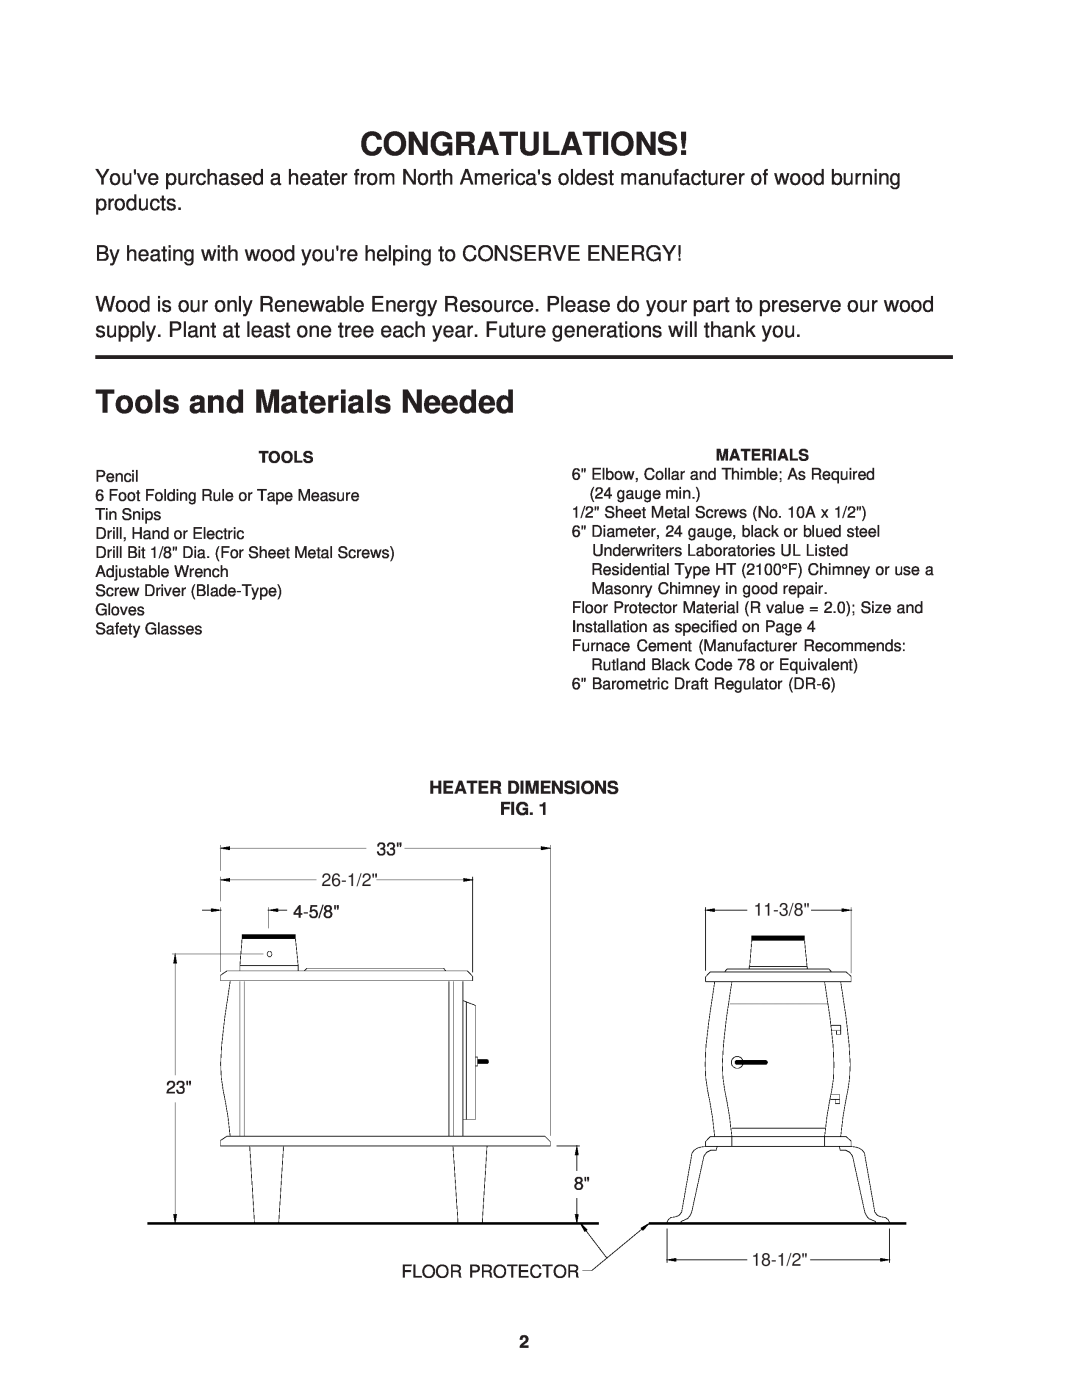 United States Stove 1261 owner manual Congratulations, Tools and Materials Needed, Heater Dimensions 